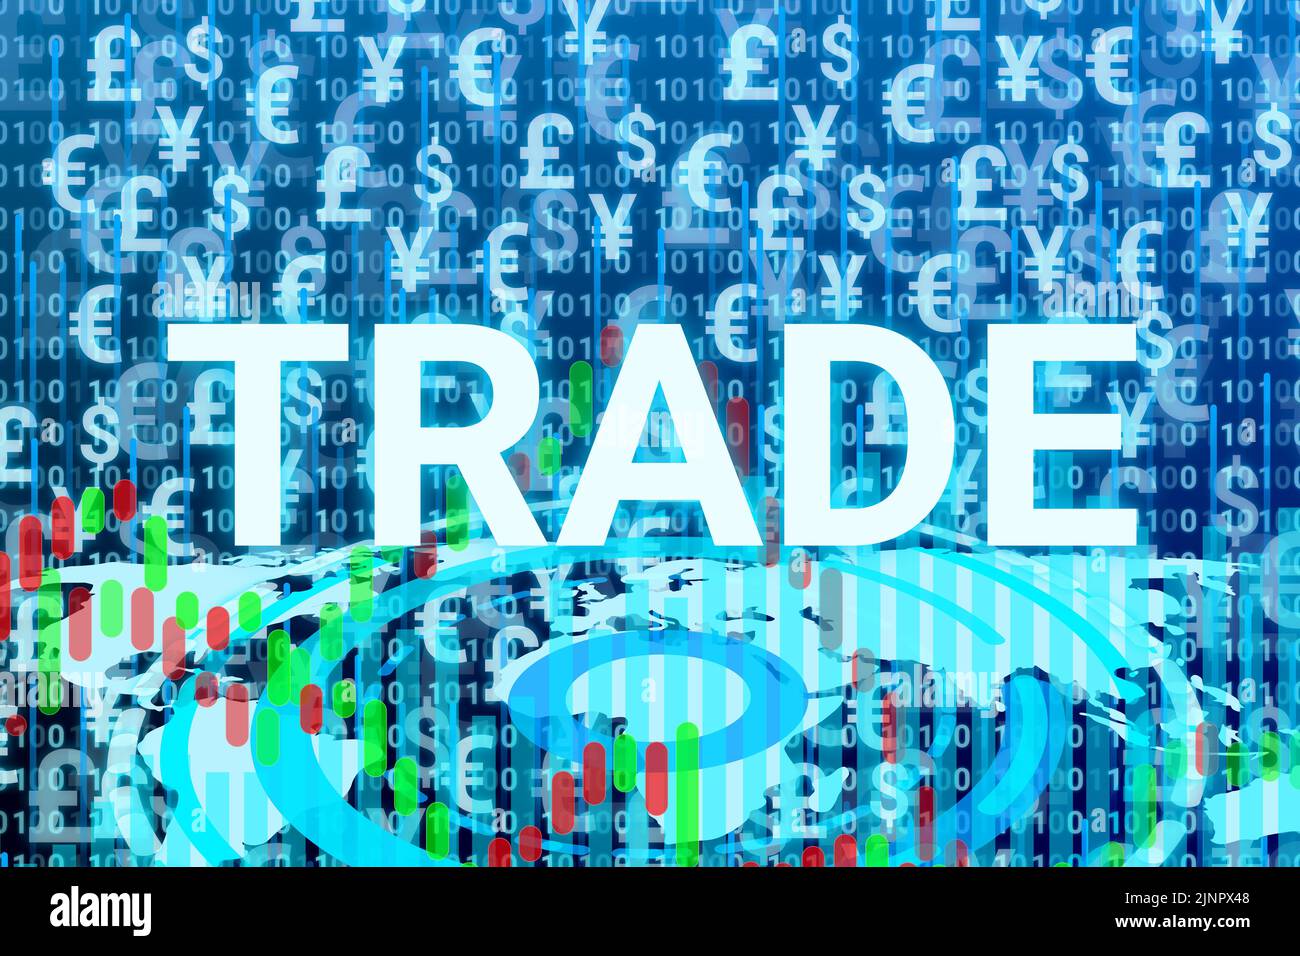 world trade and currency digital background with world map. concept for world trade, business and currency demand. Stock Photo